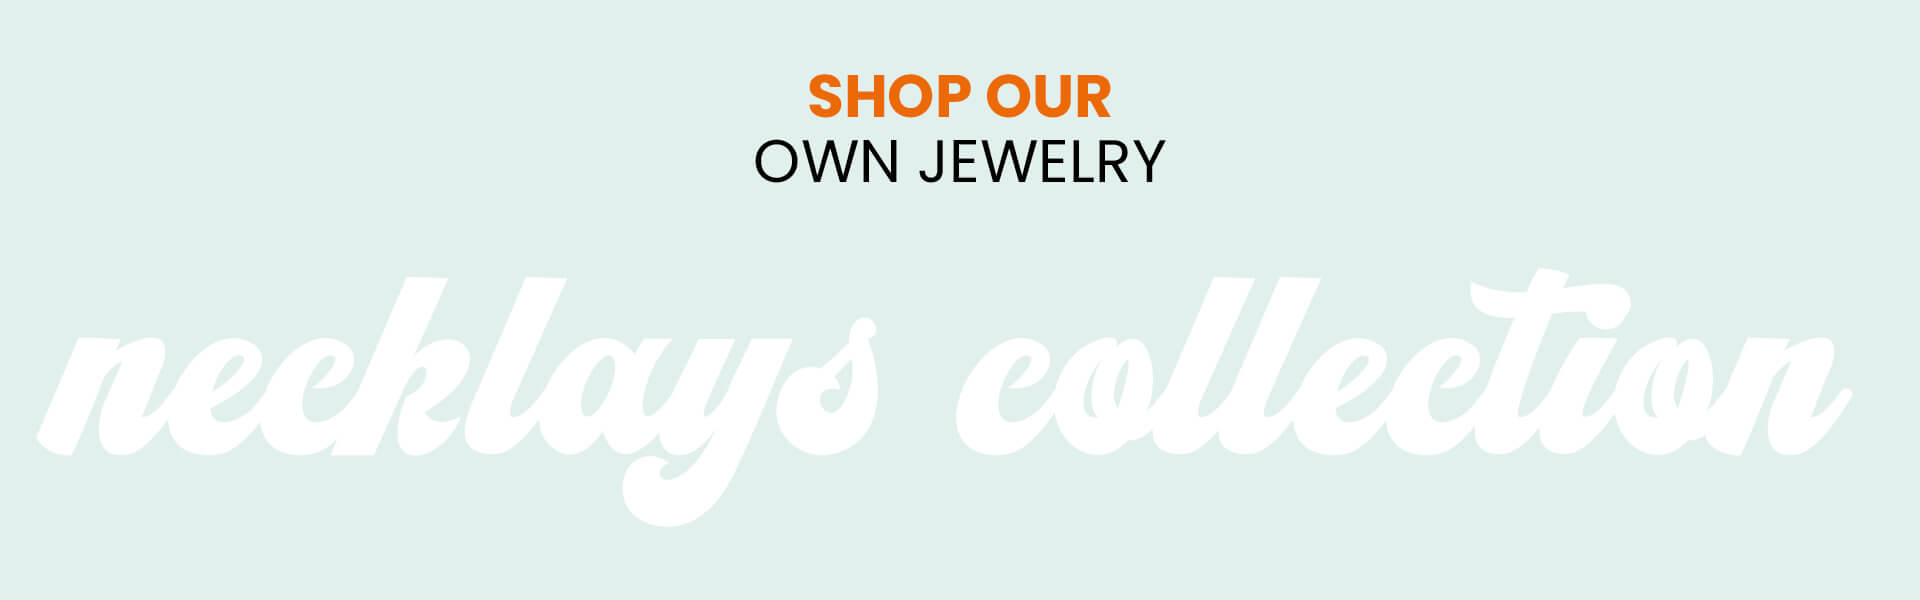 shop our own jewelry - necklays collection